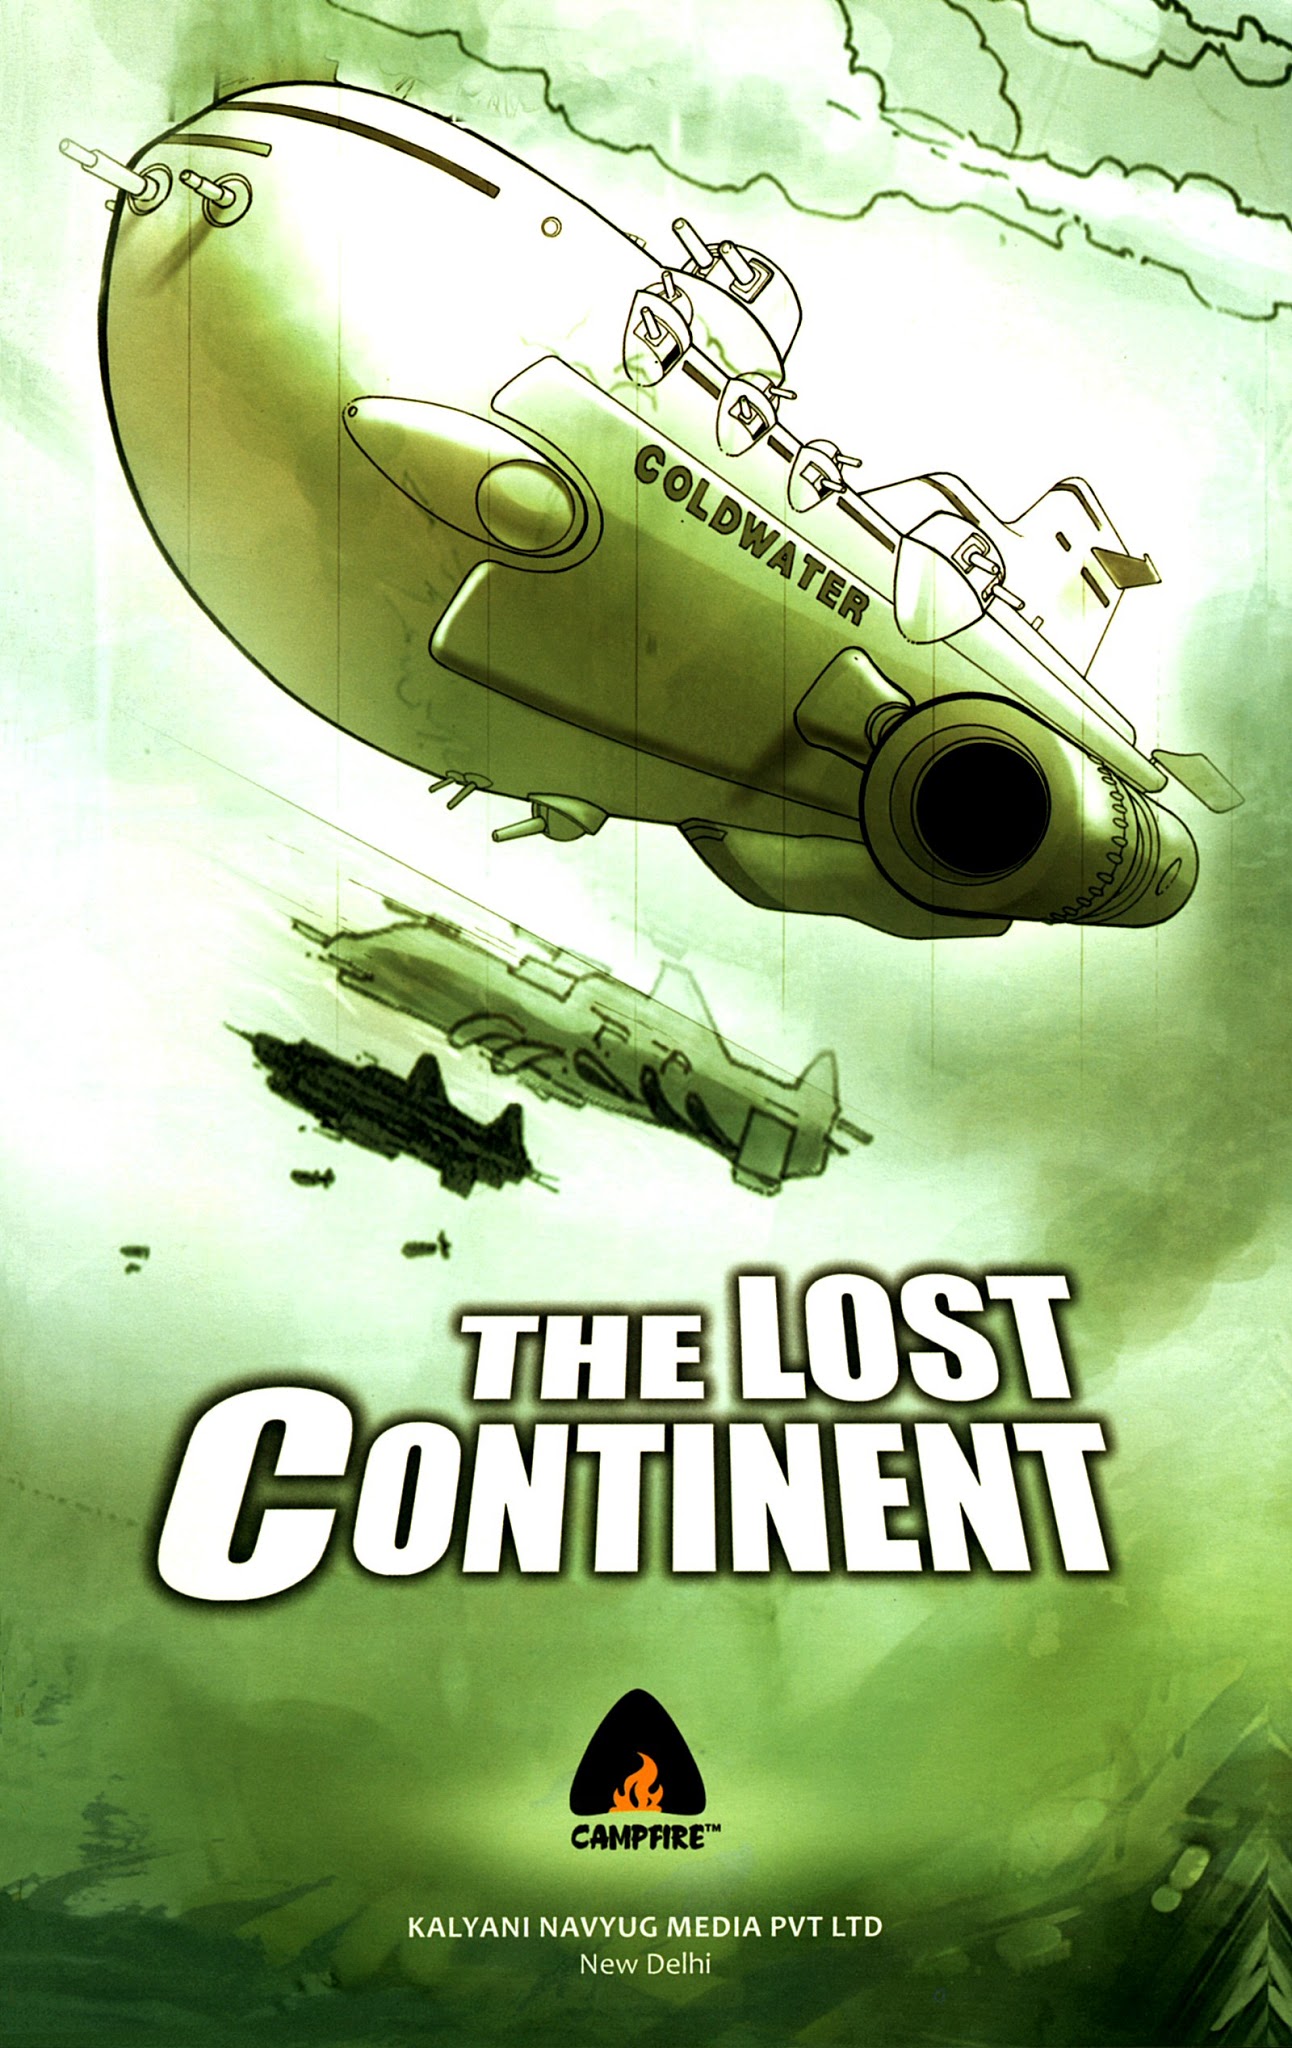 Read online The Lost Continent comic -  Issue # Full - 5